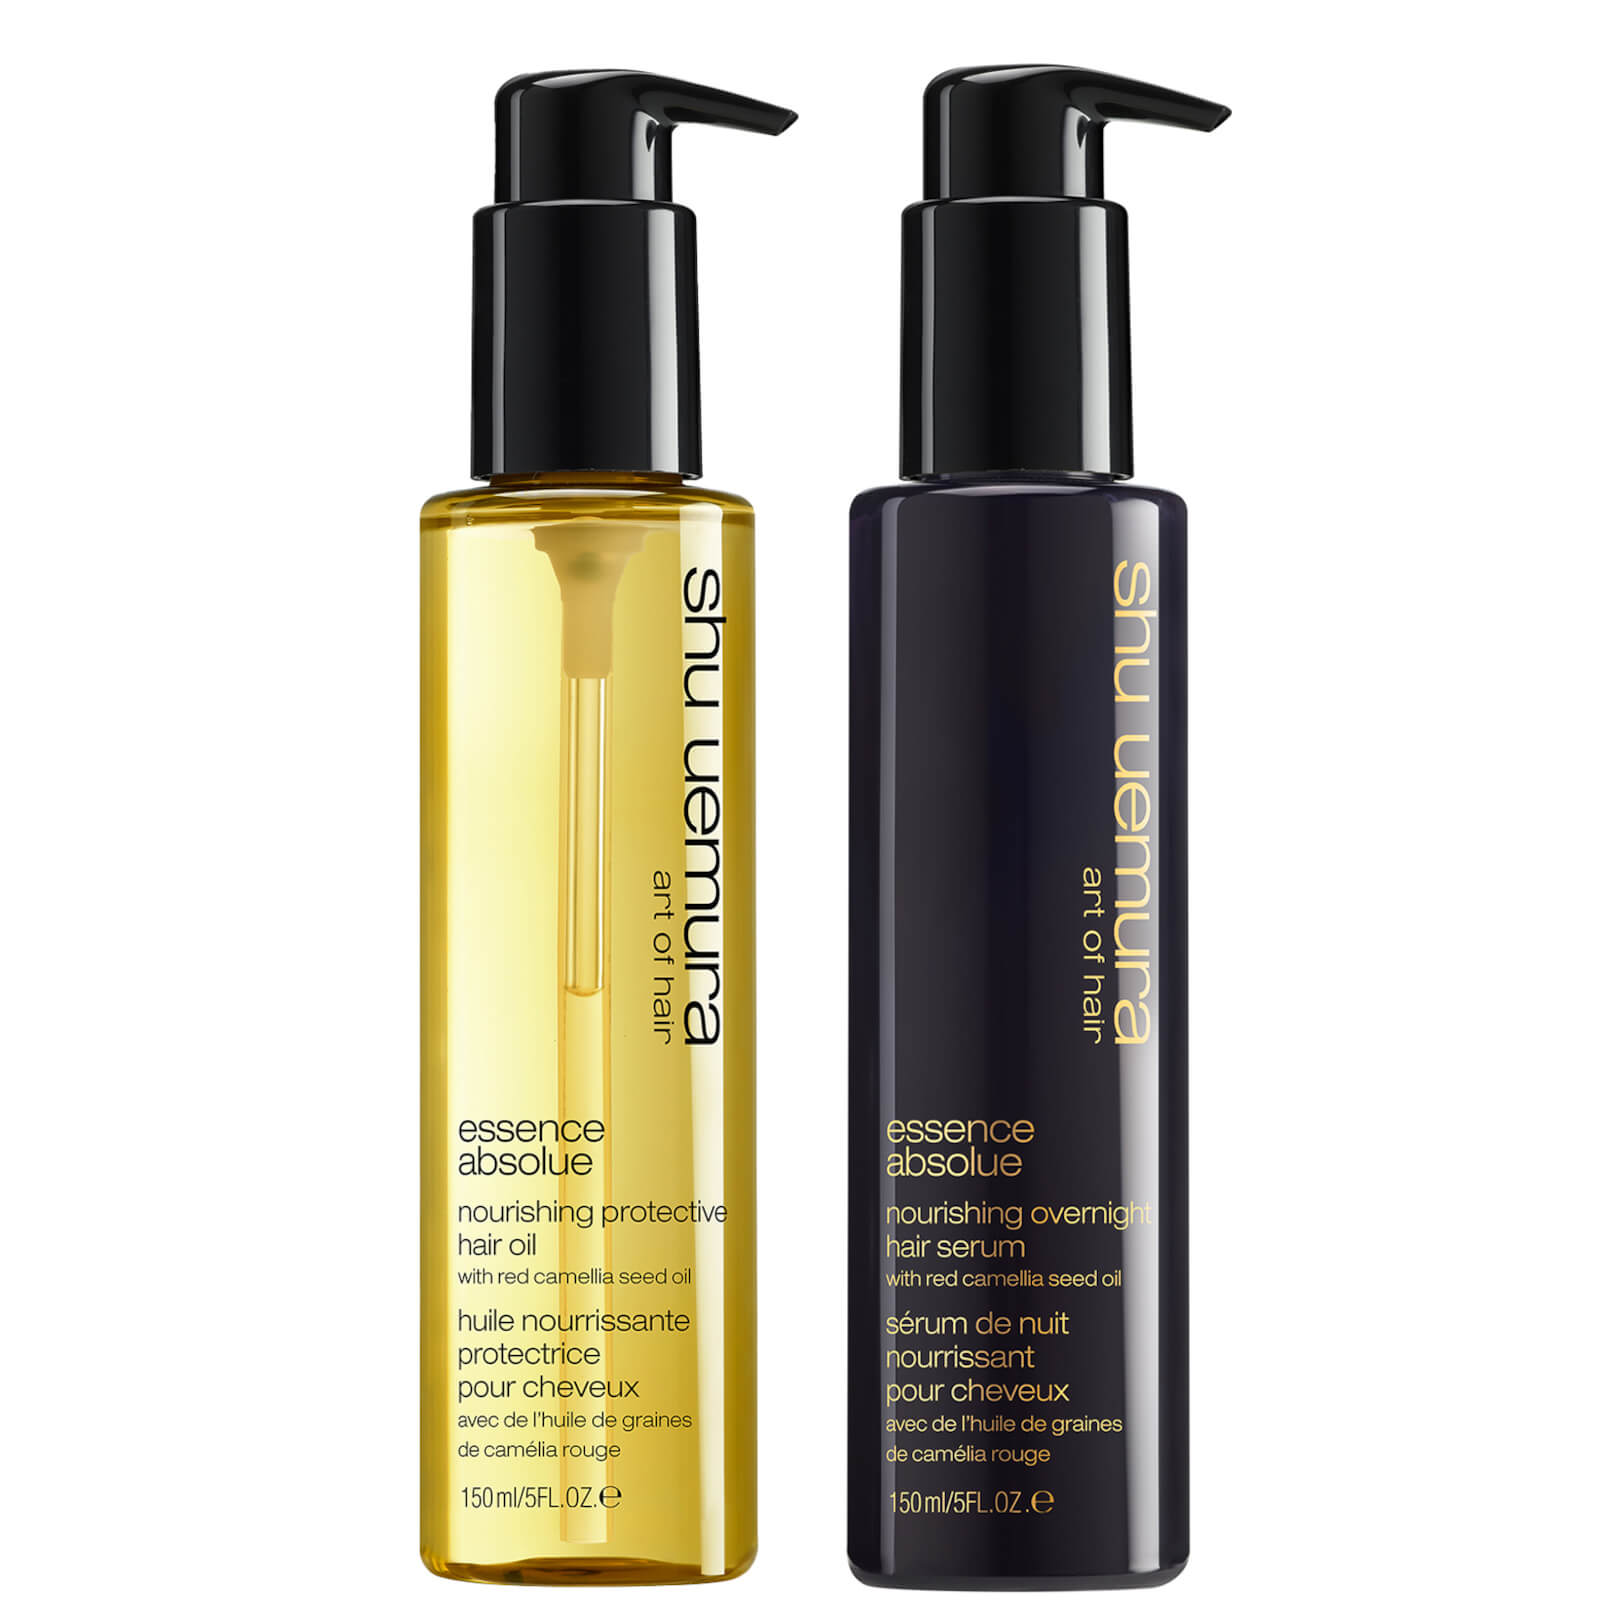 Shu Uemura Art of Hair Essence Absolue Oil and Essence Absolue Overnight Serum Duo for Hair Protecte